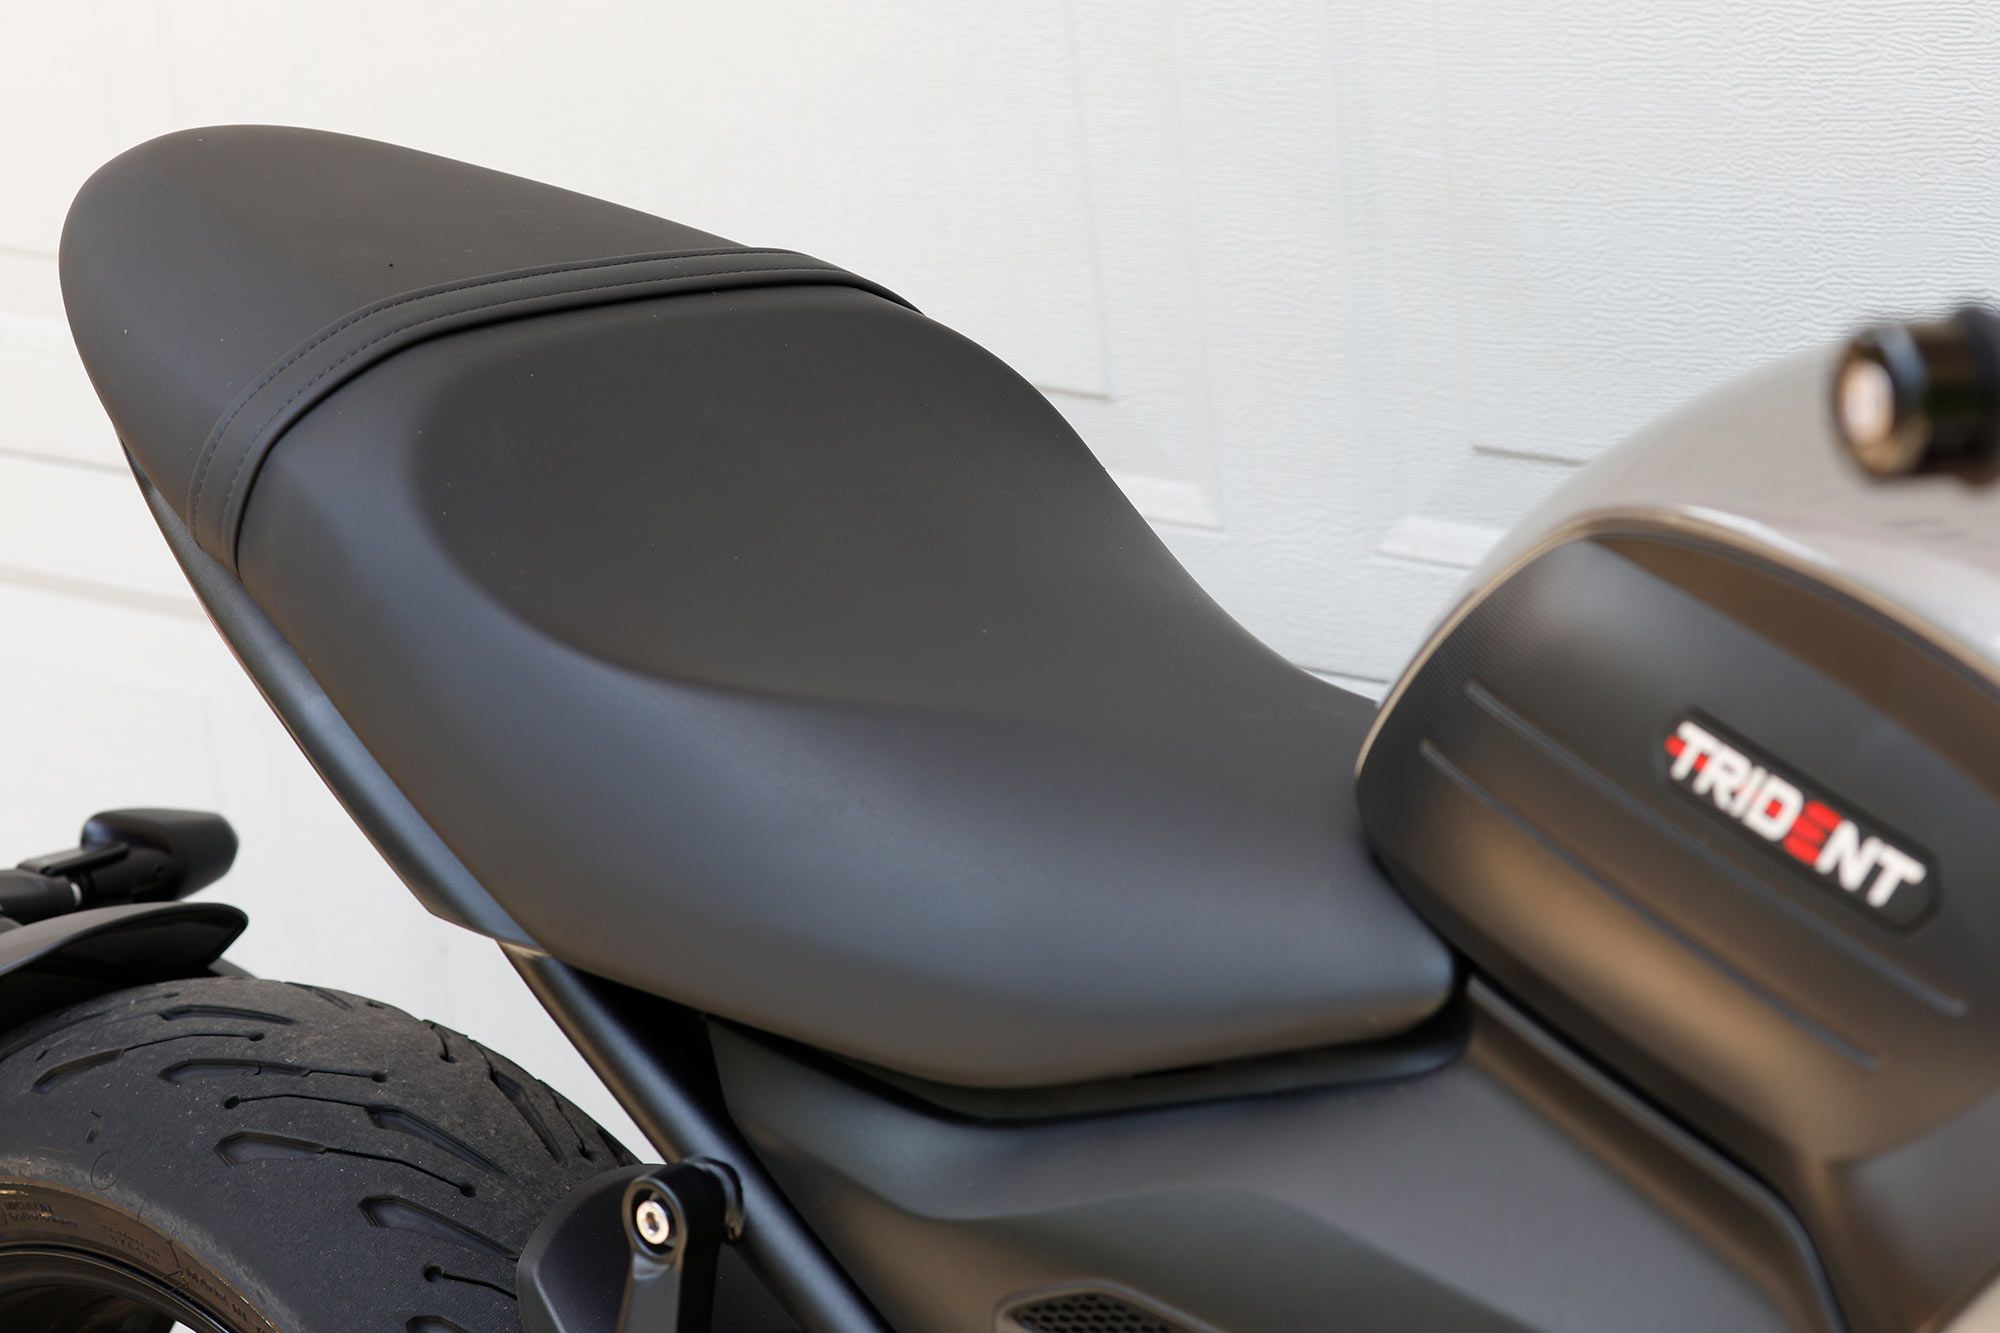 The one-piece saddle is nice and low making the Trident more accessible to smaller riders.